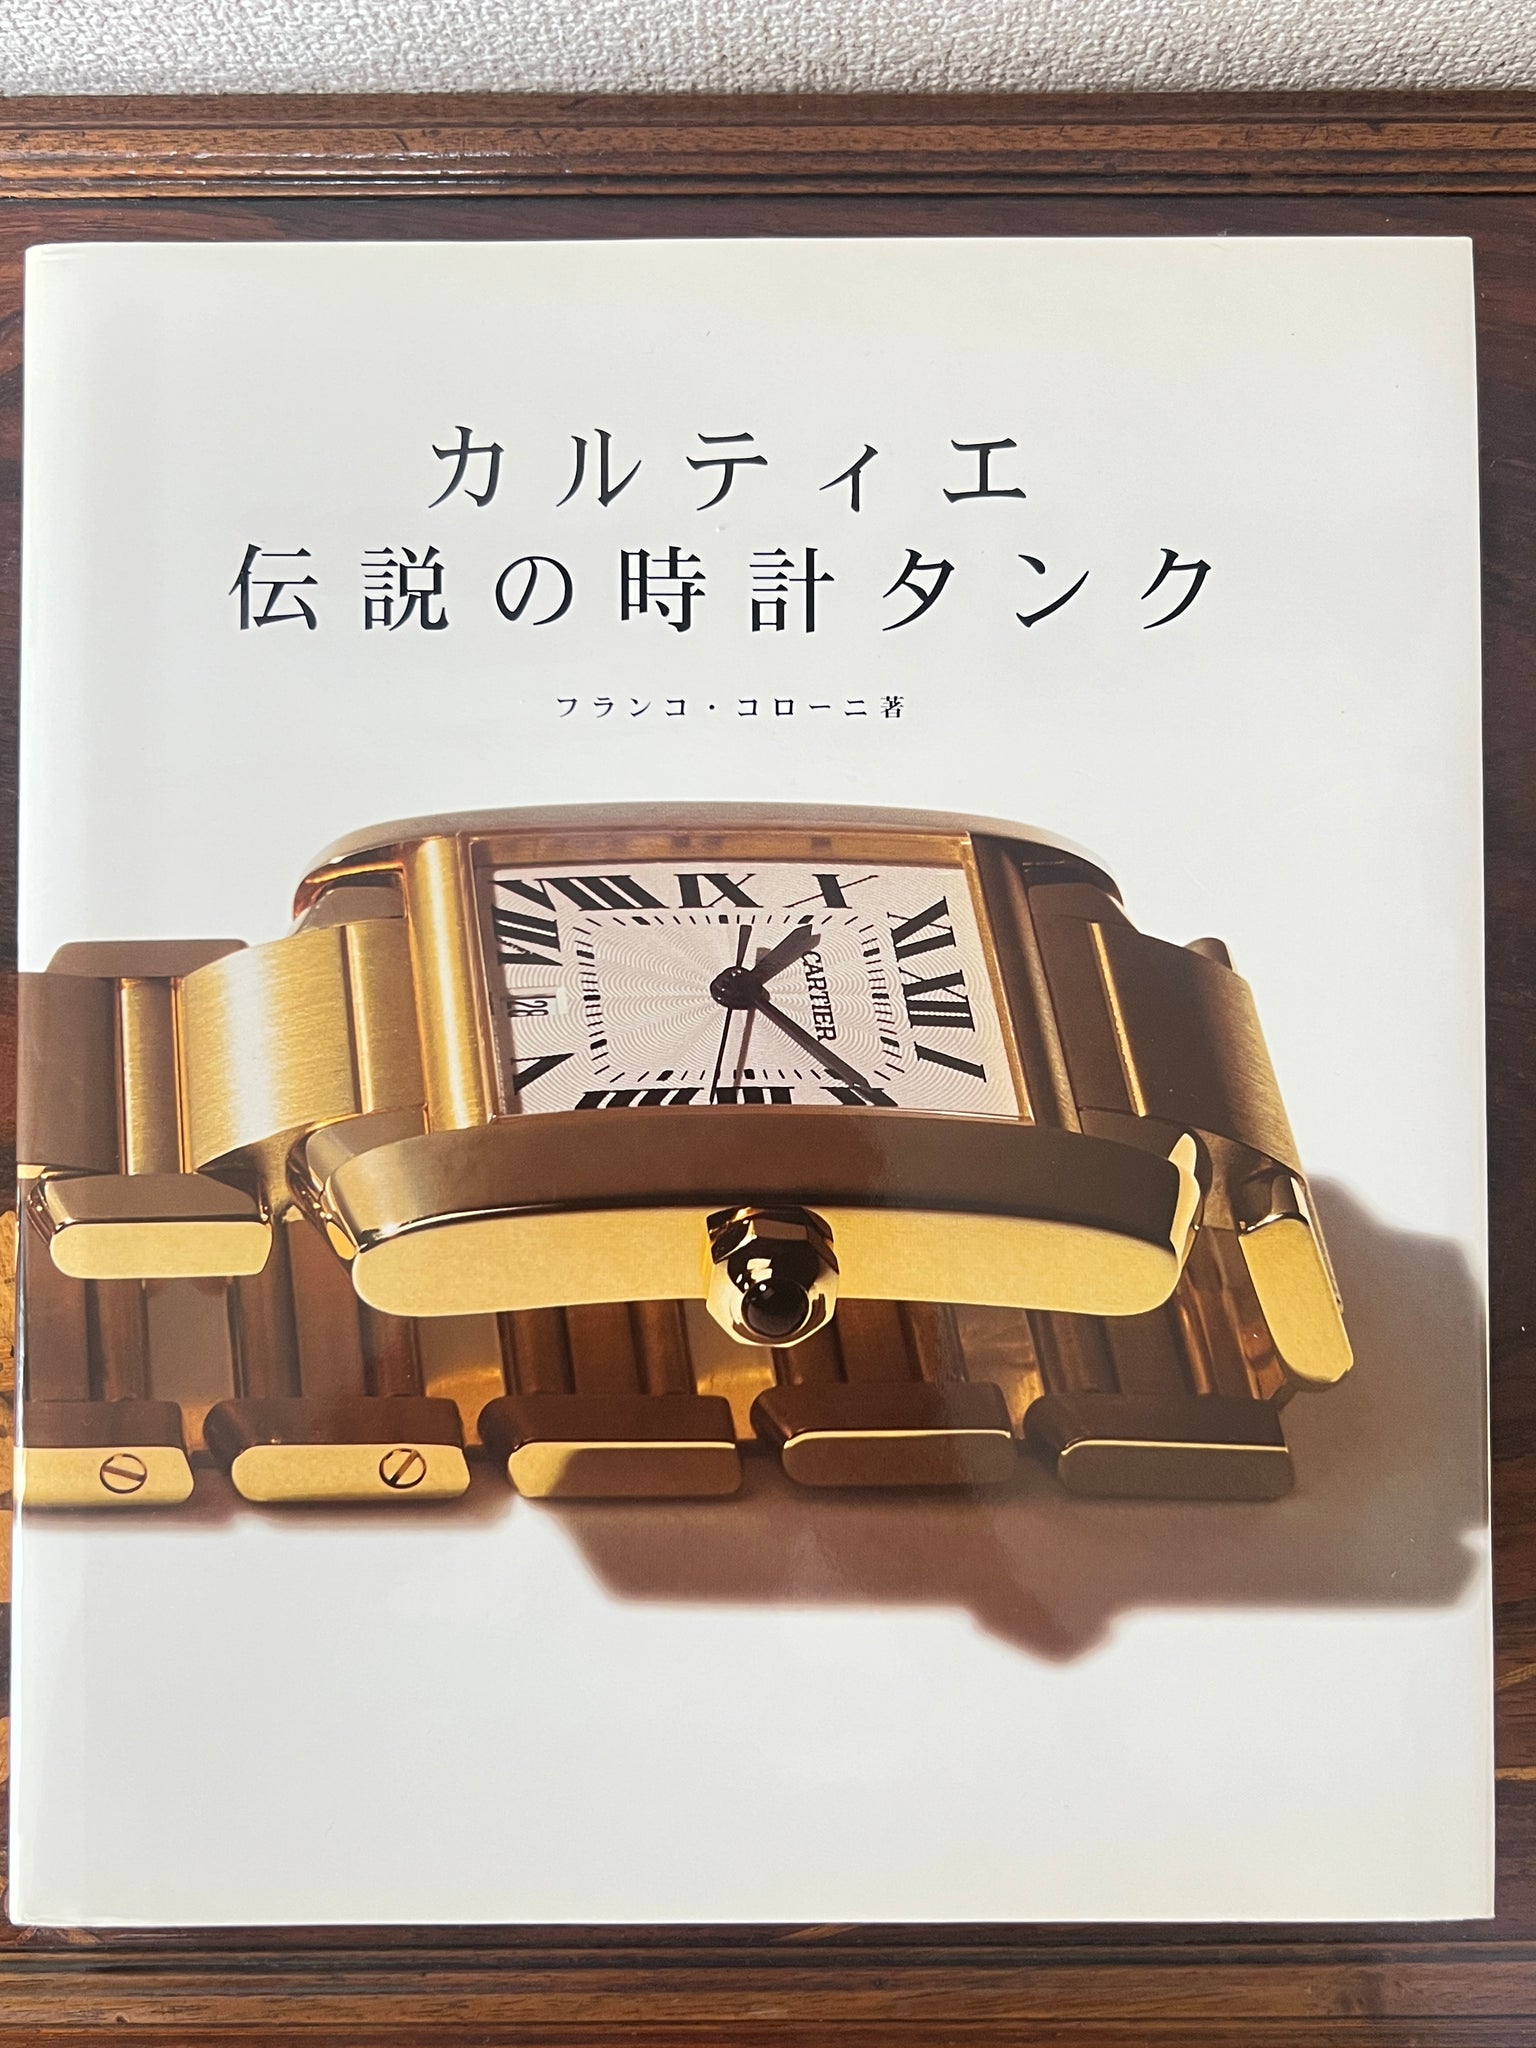 Franco Cologni's book "Cartier: The Legendary Tank Watch"